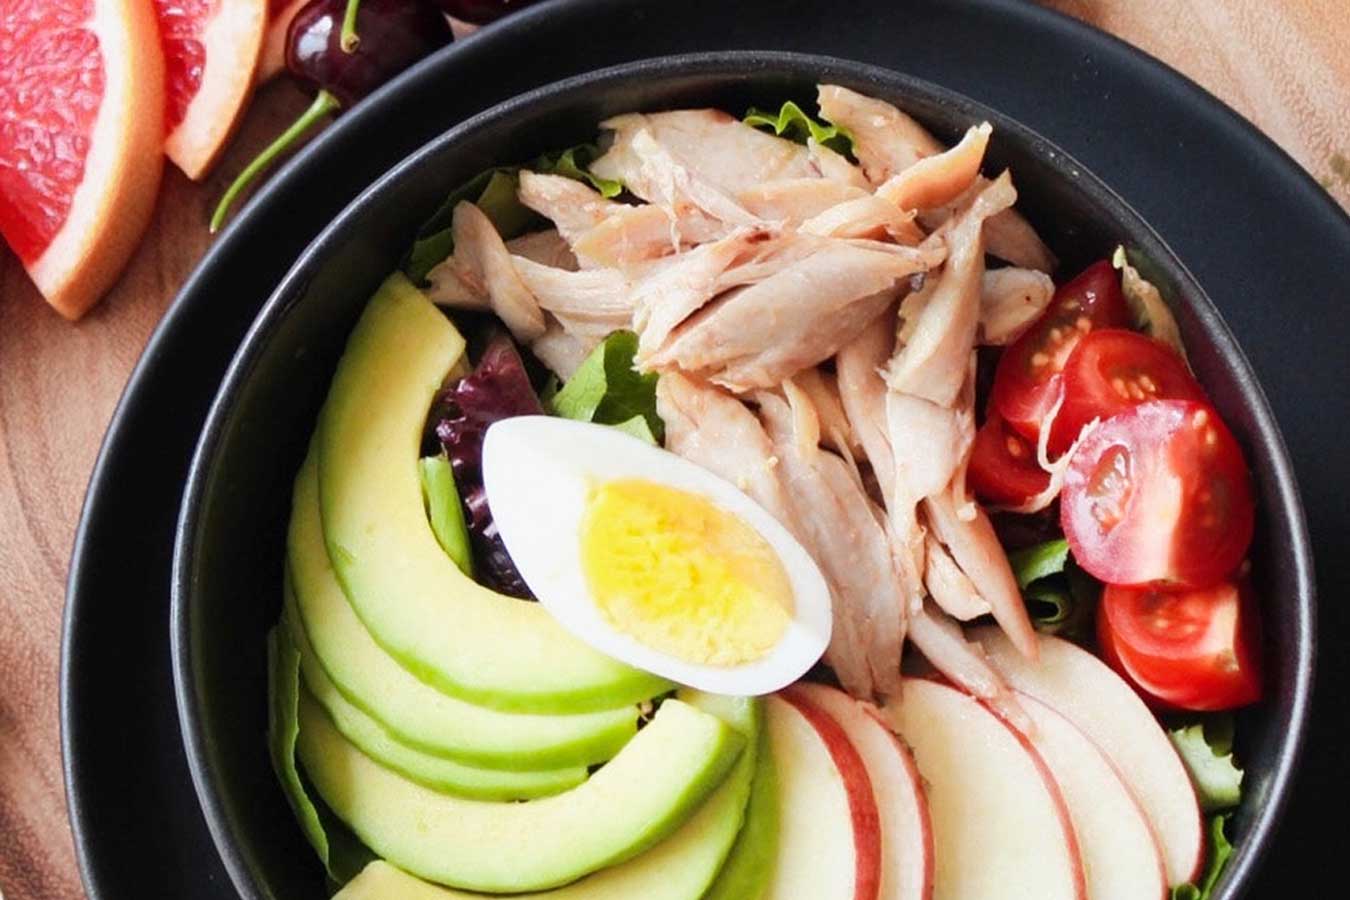 Bring Your Own Lunch: Healthy Lunch Ideas for Work (Or Any Time You